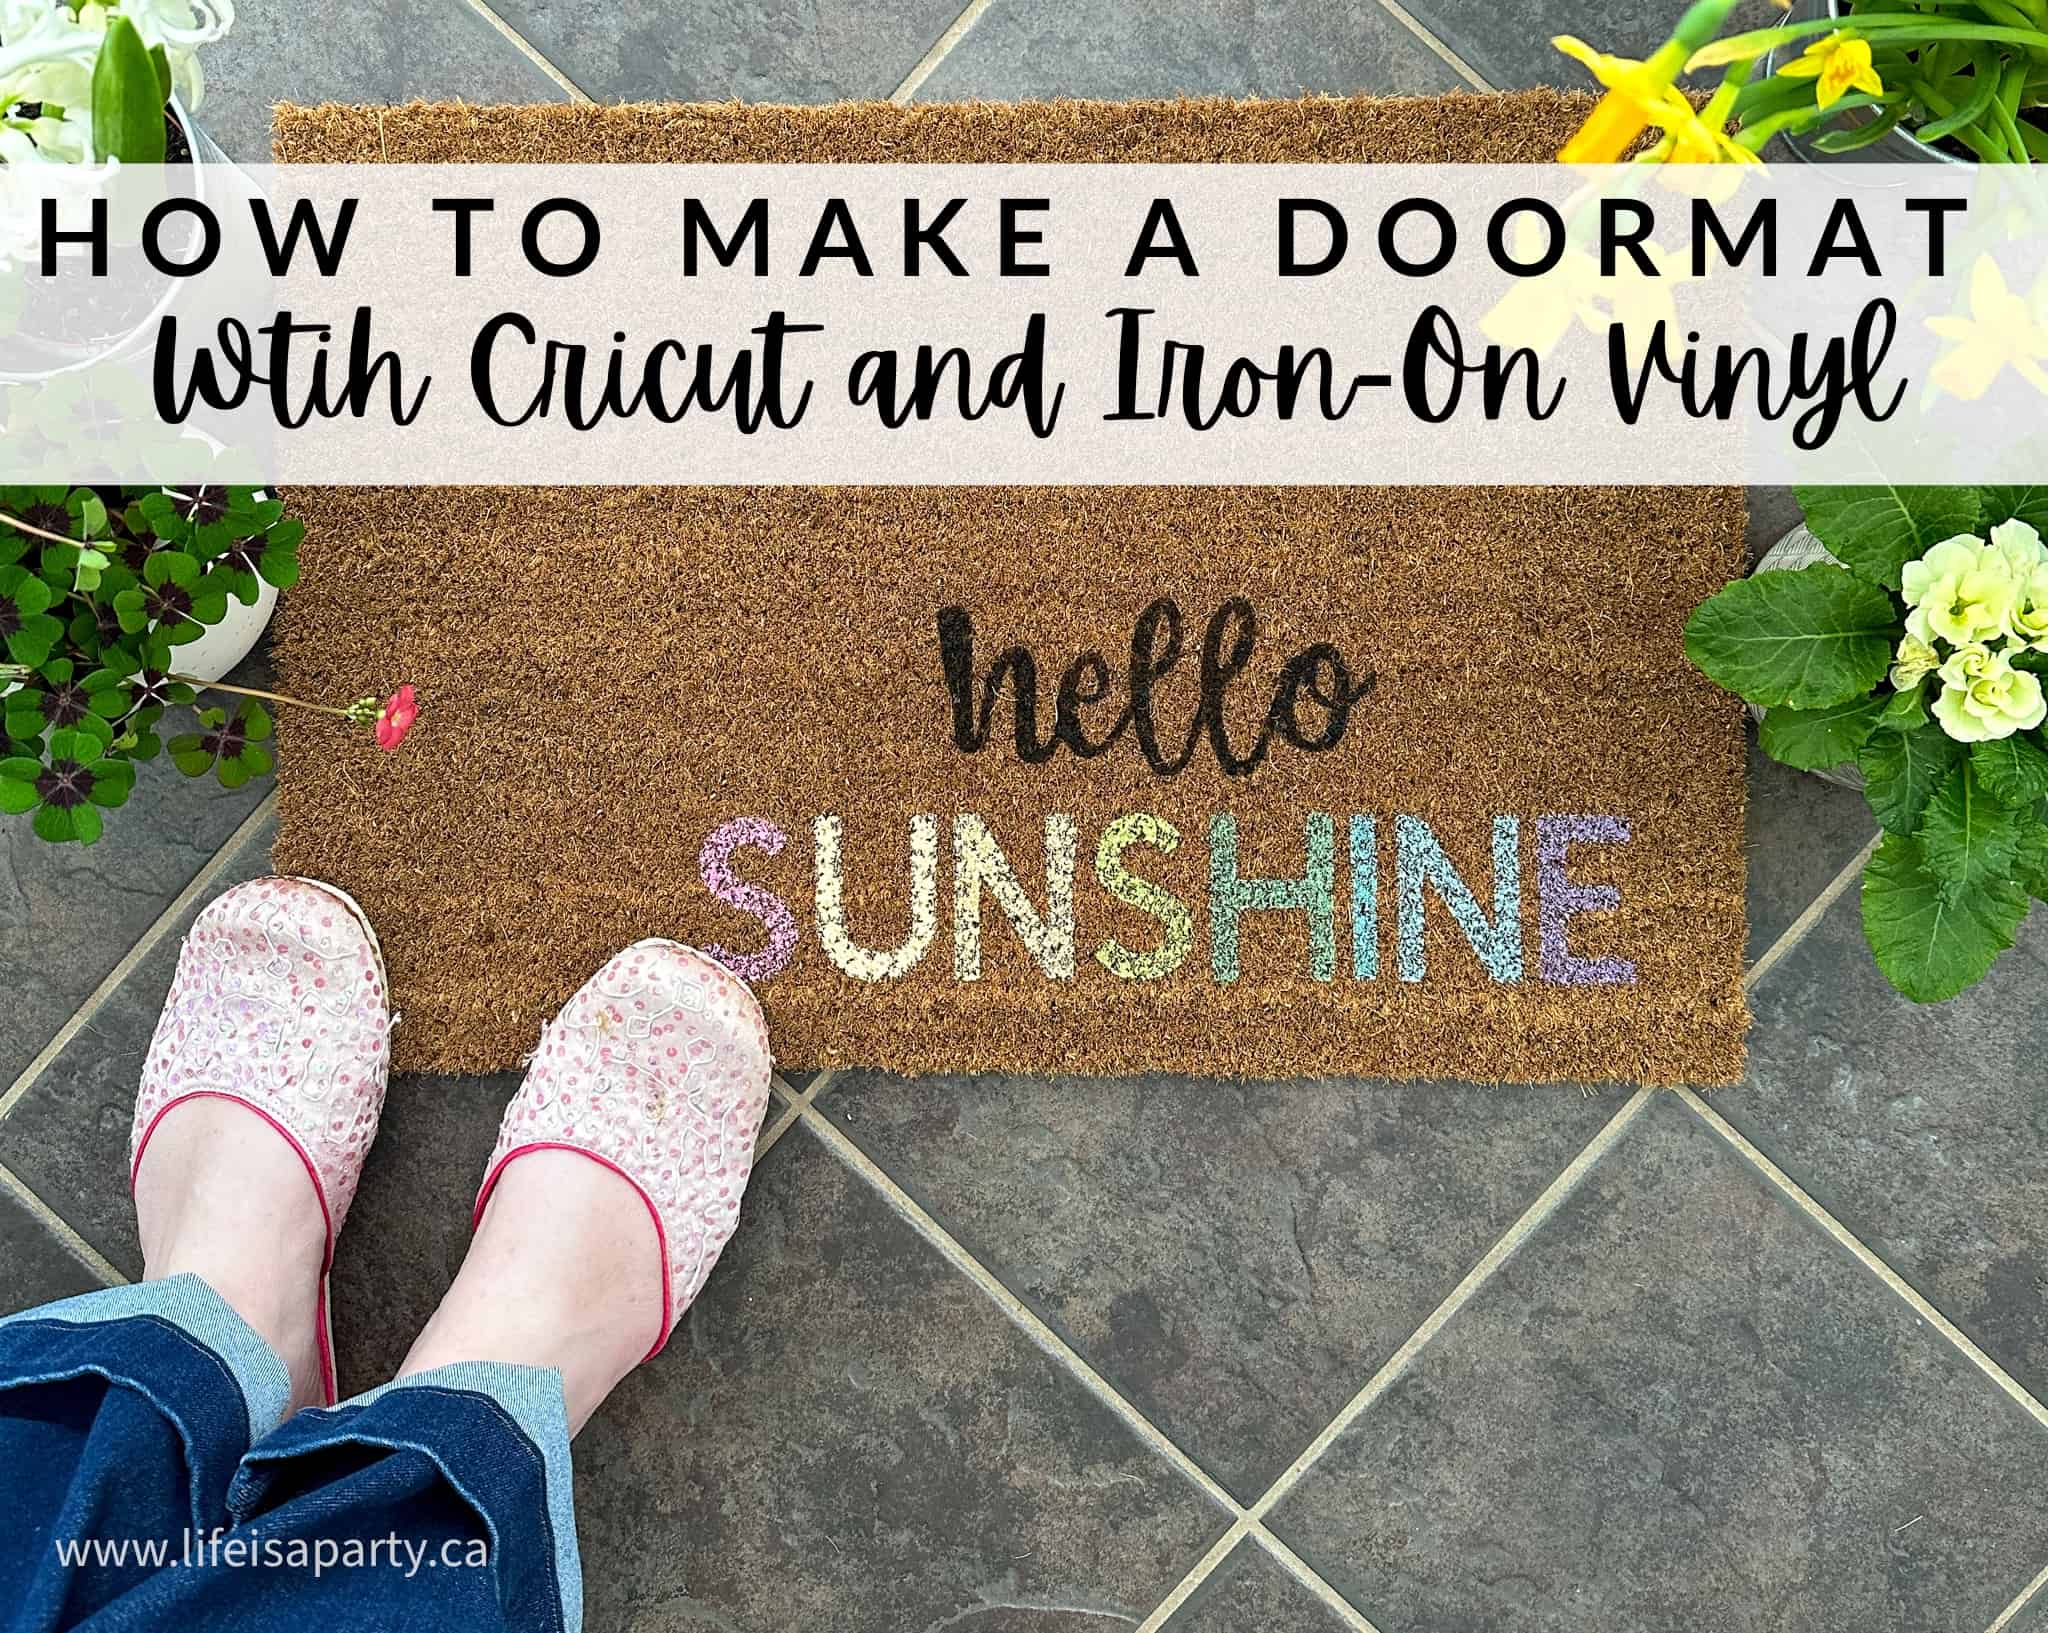 How To Make A Doormat With Cricut and Iron-On Vinyl